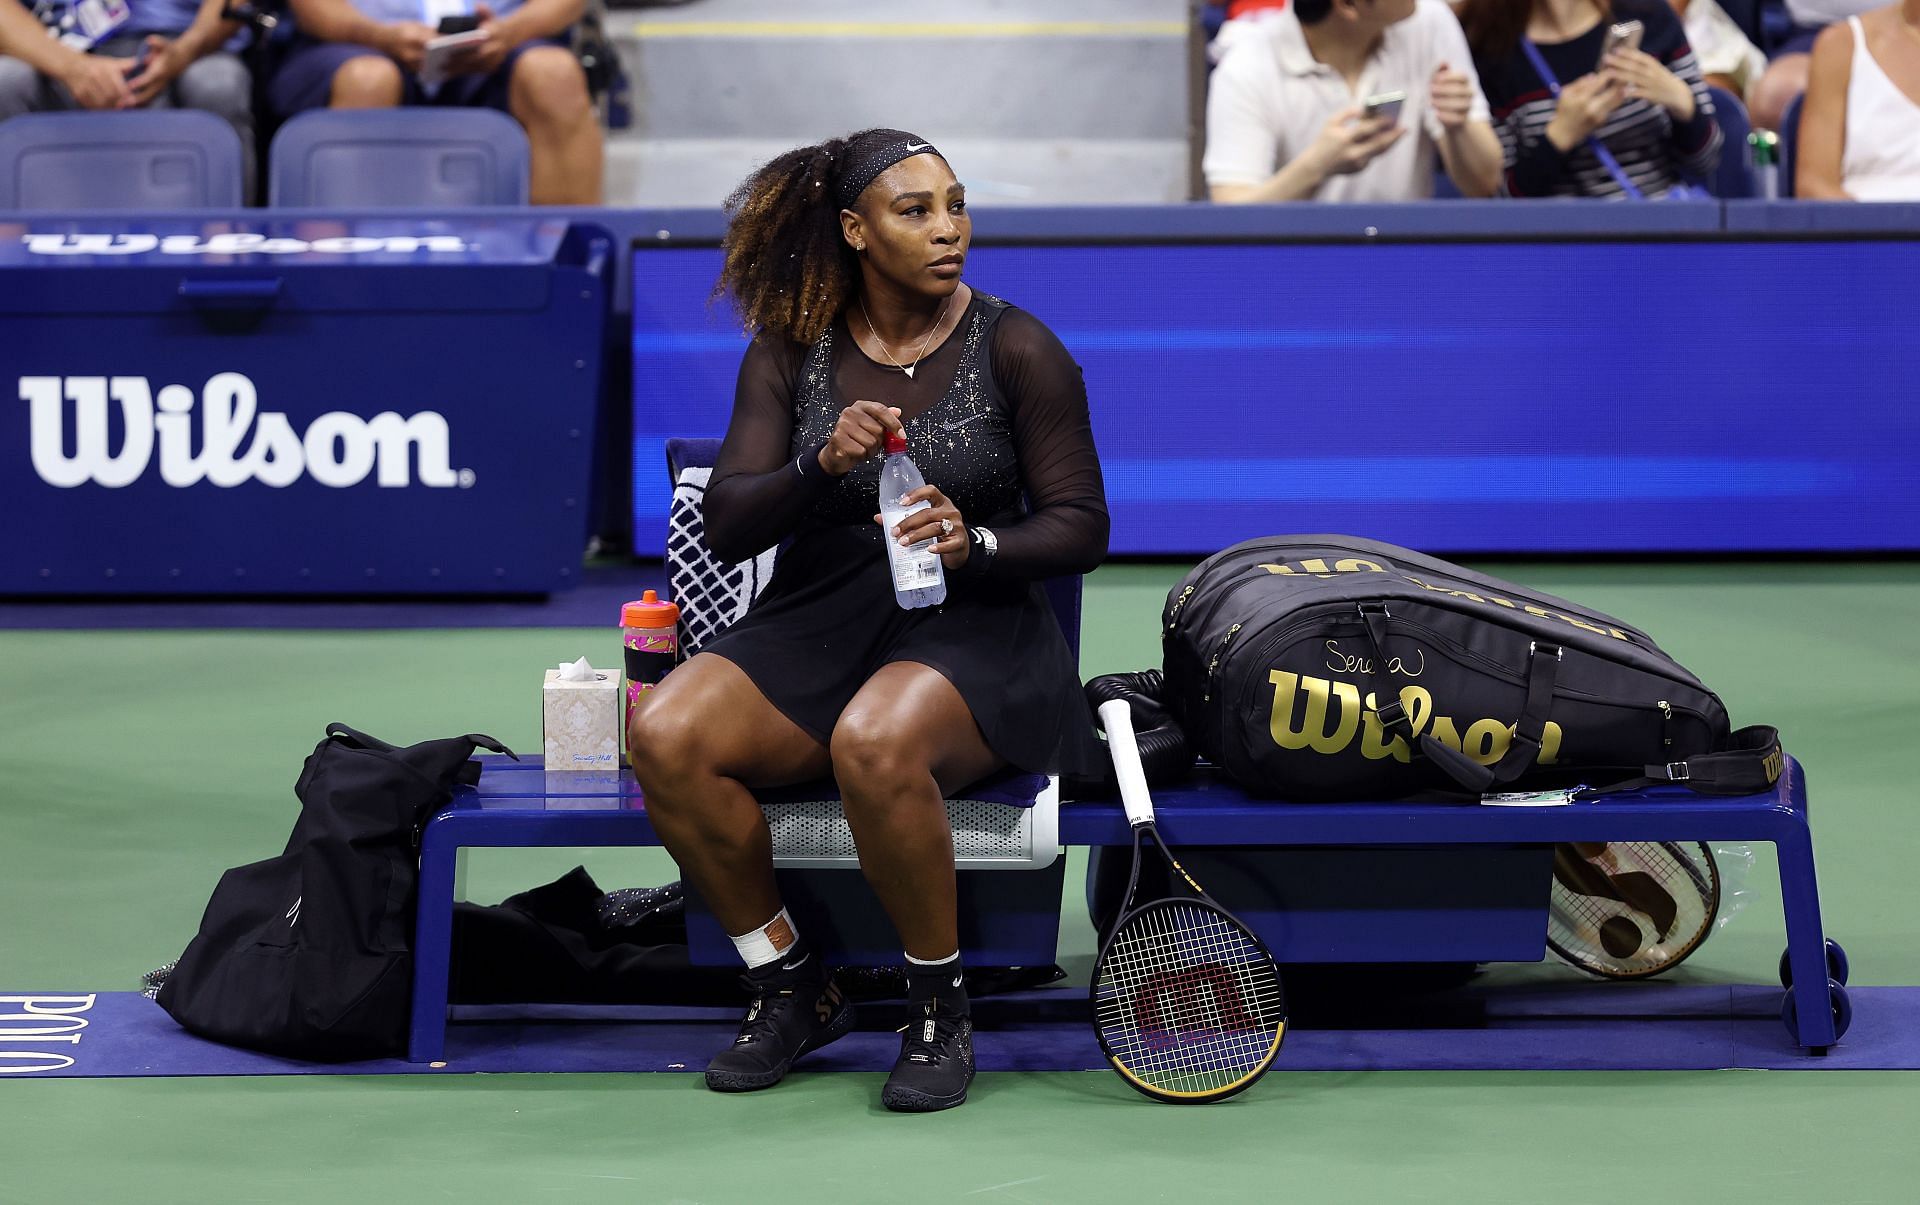 Serena Williams looks on before her match against Danka Kovinic at the 2022 US Open - Day 1